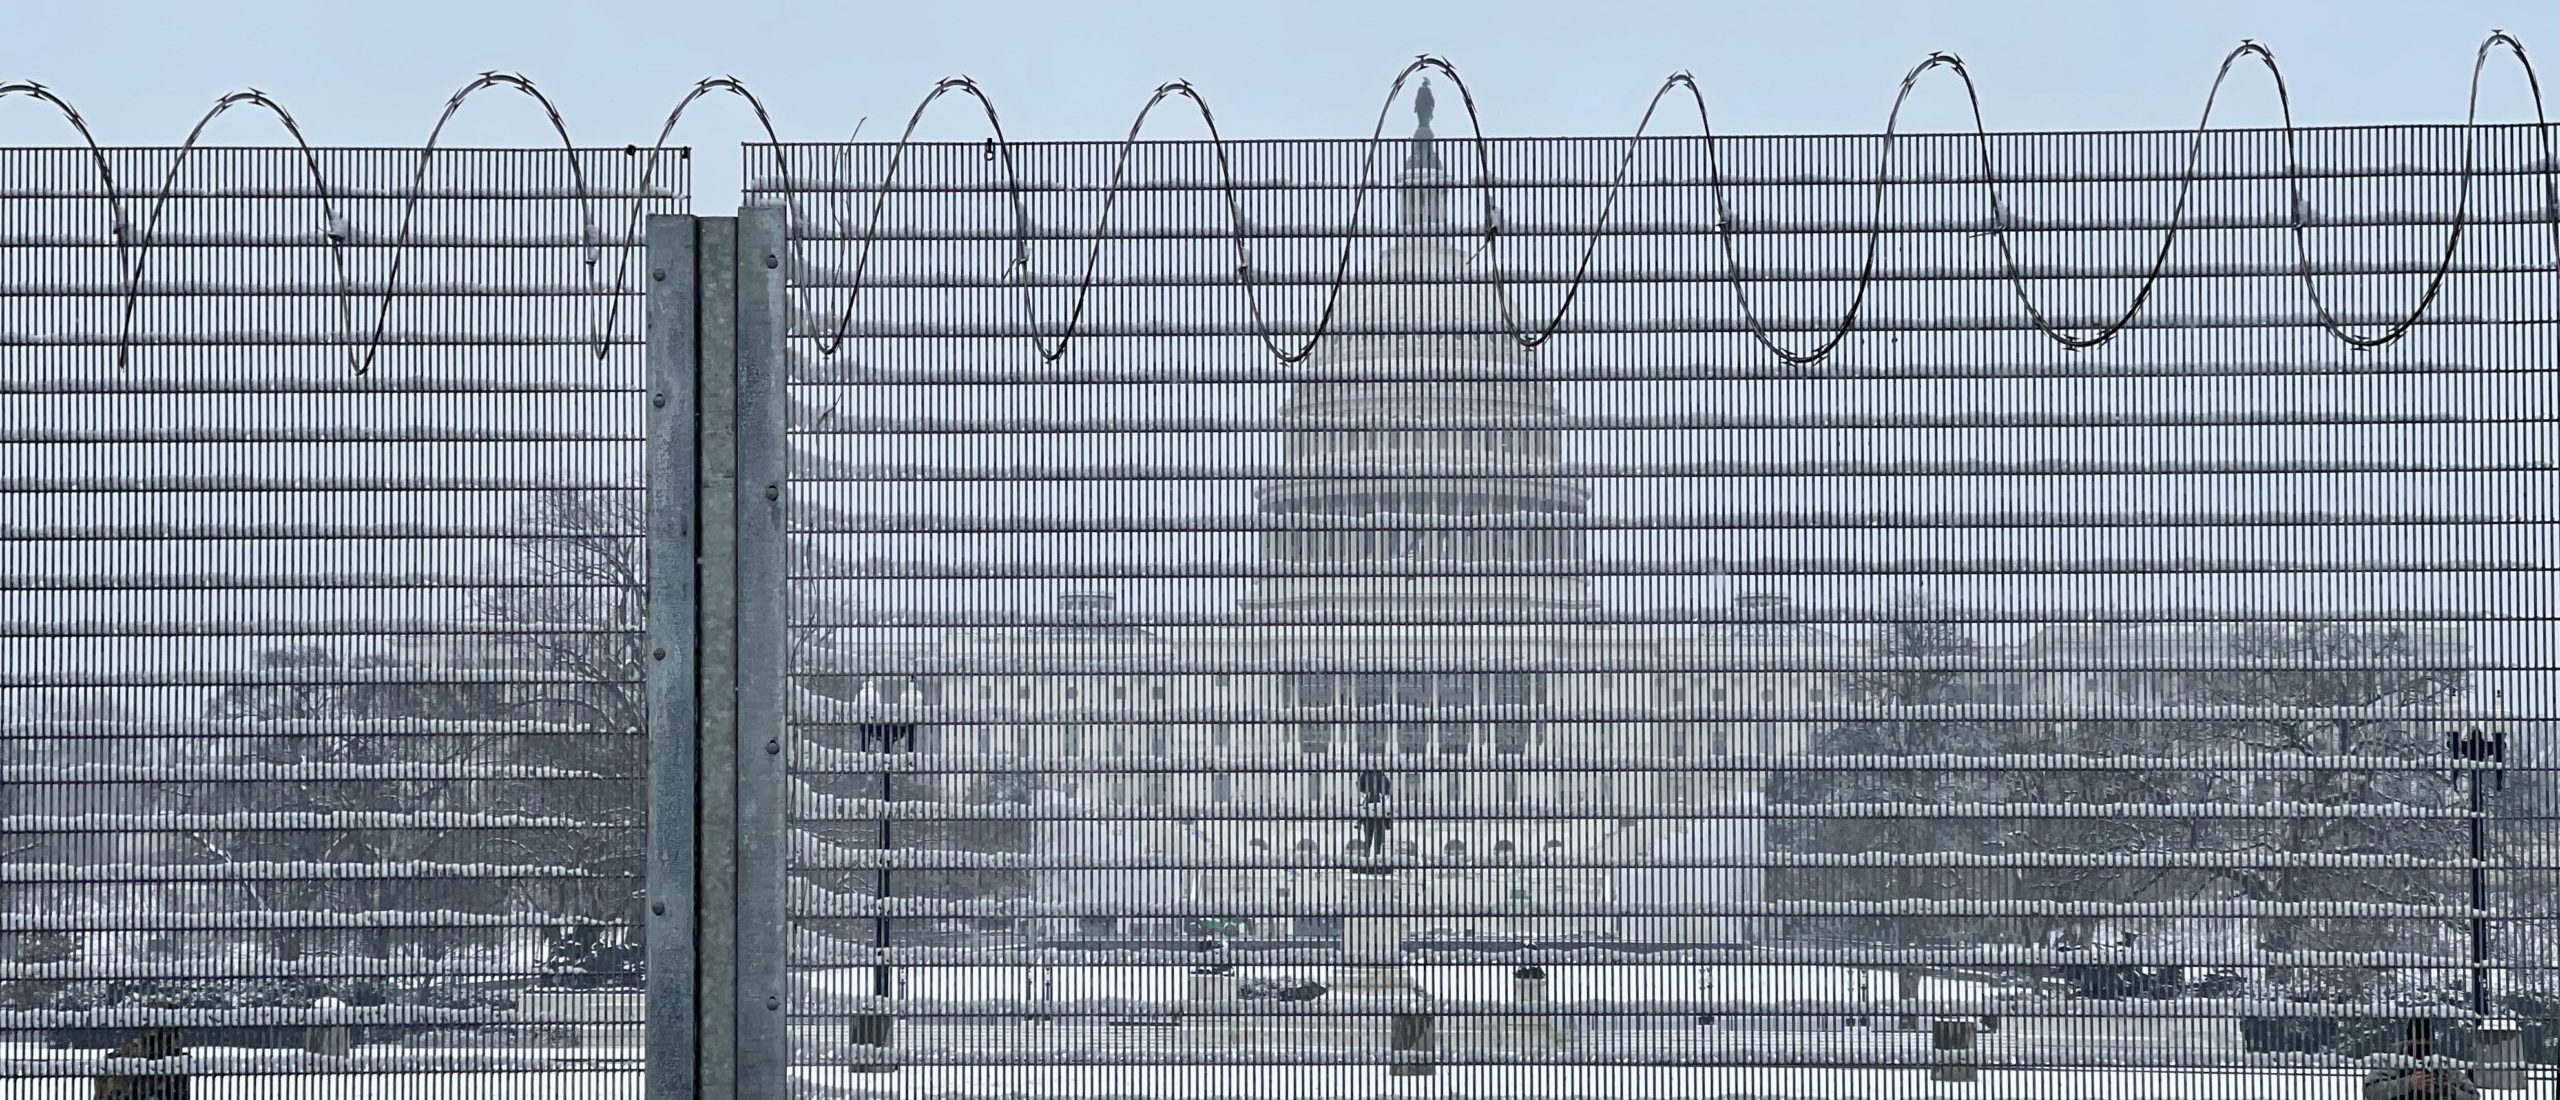 Fencing is seen in front of the US Capitol on January 31, 2021 after a snowfall in Washington, DC. (Photo by Daniel SLIM / AFP) (Photo by DANIEL SLIM/AFP via Getty Images)